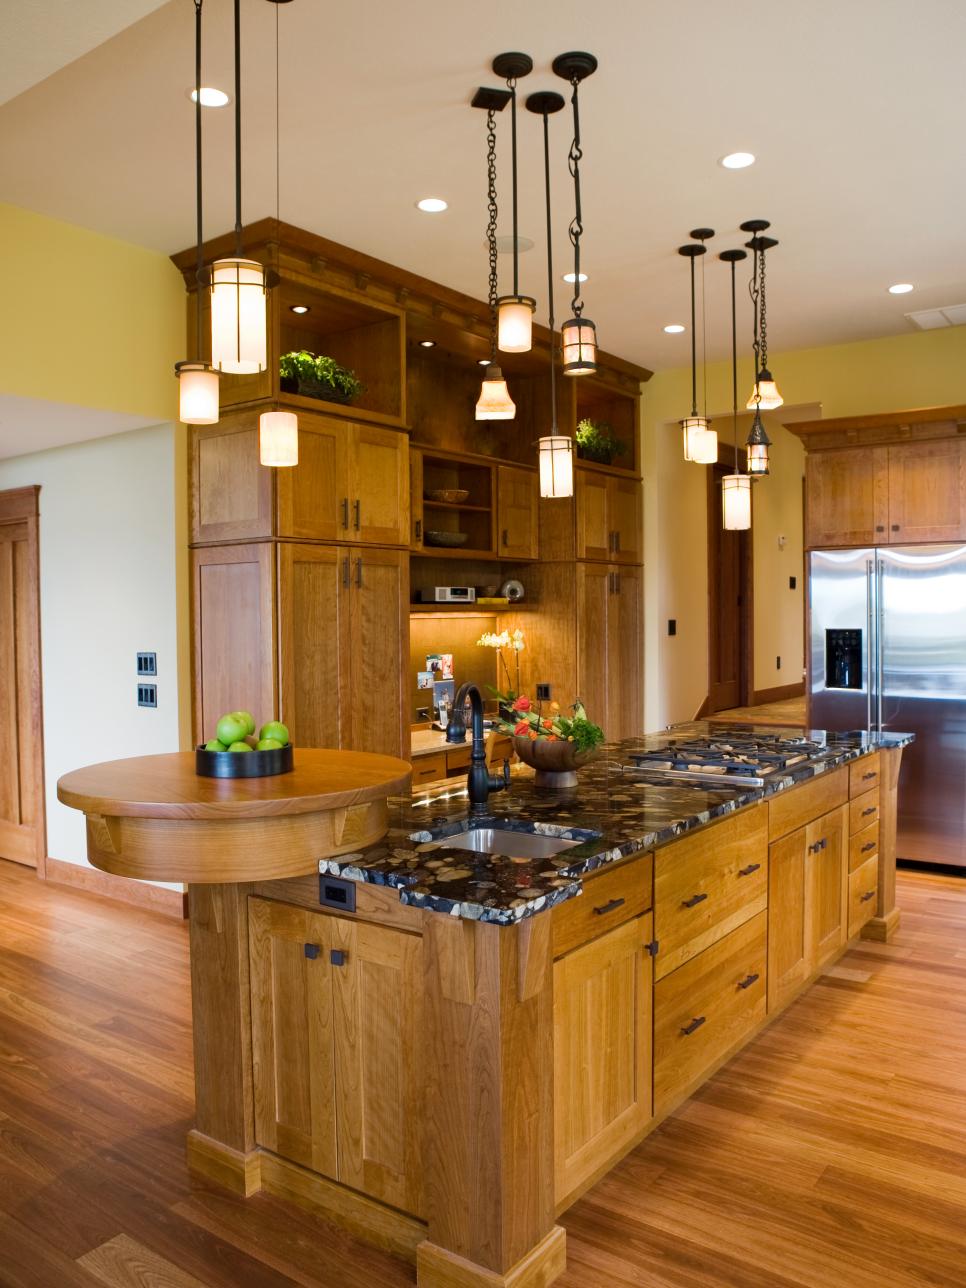 Craftsman Kitchen With Pendant Lights and Large Island